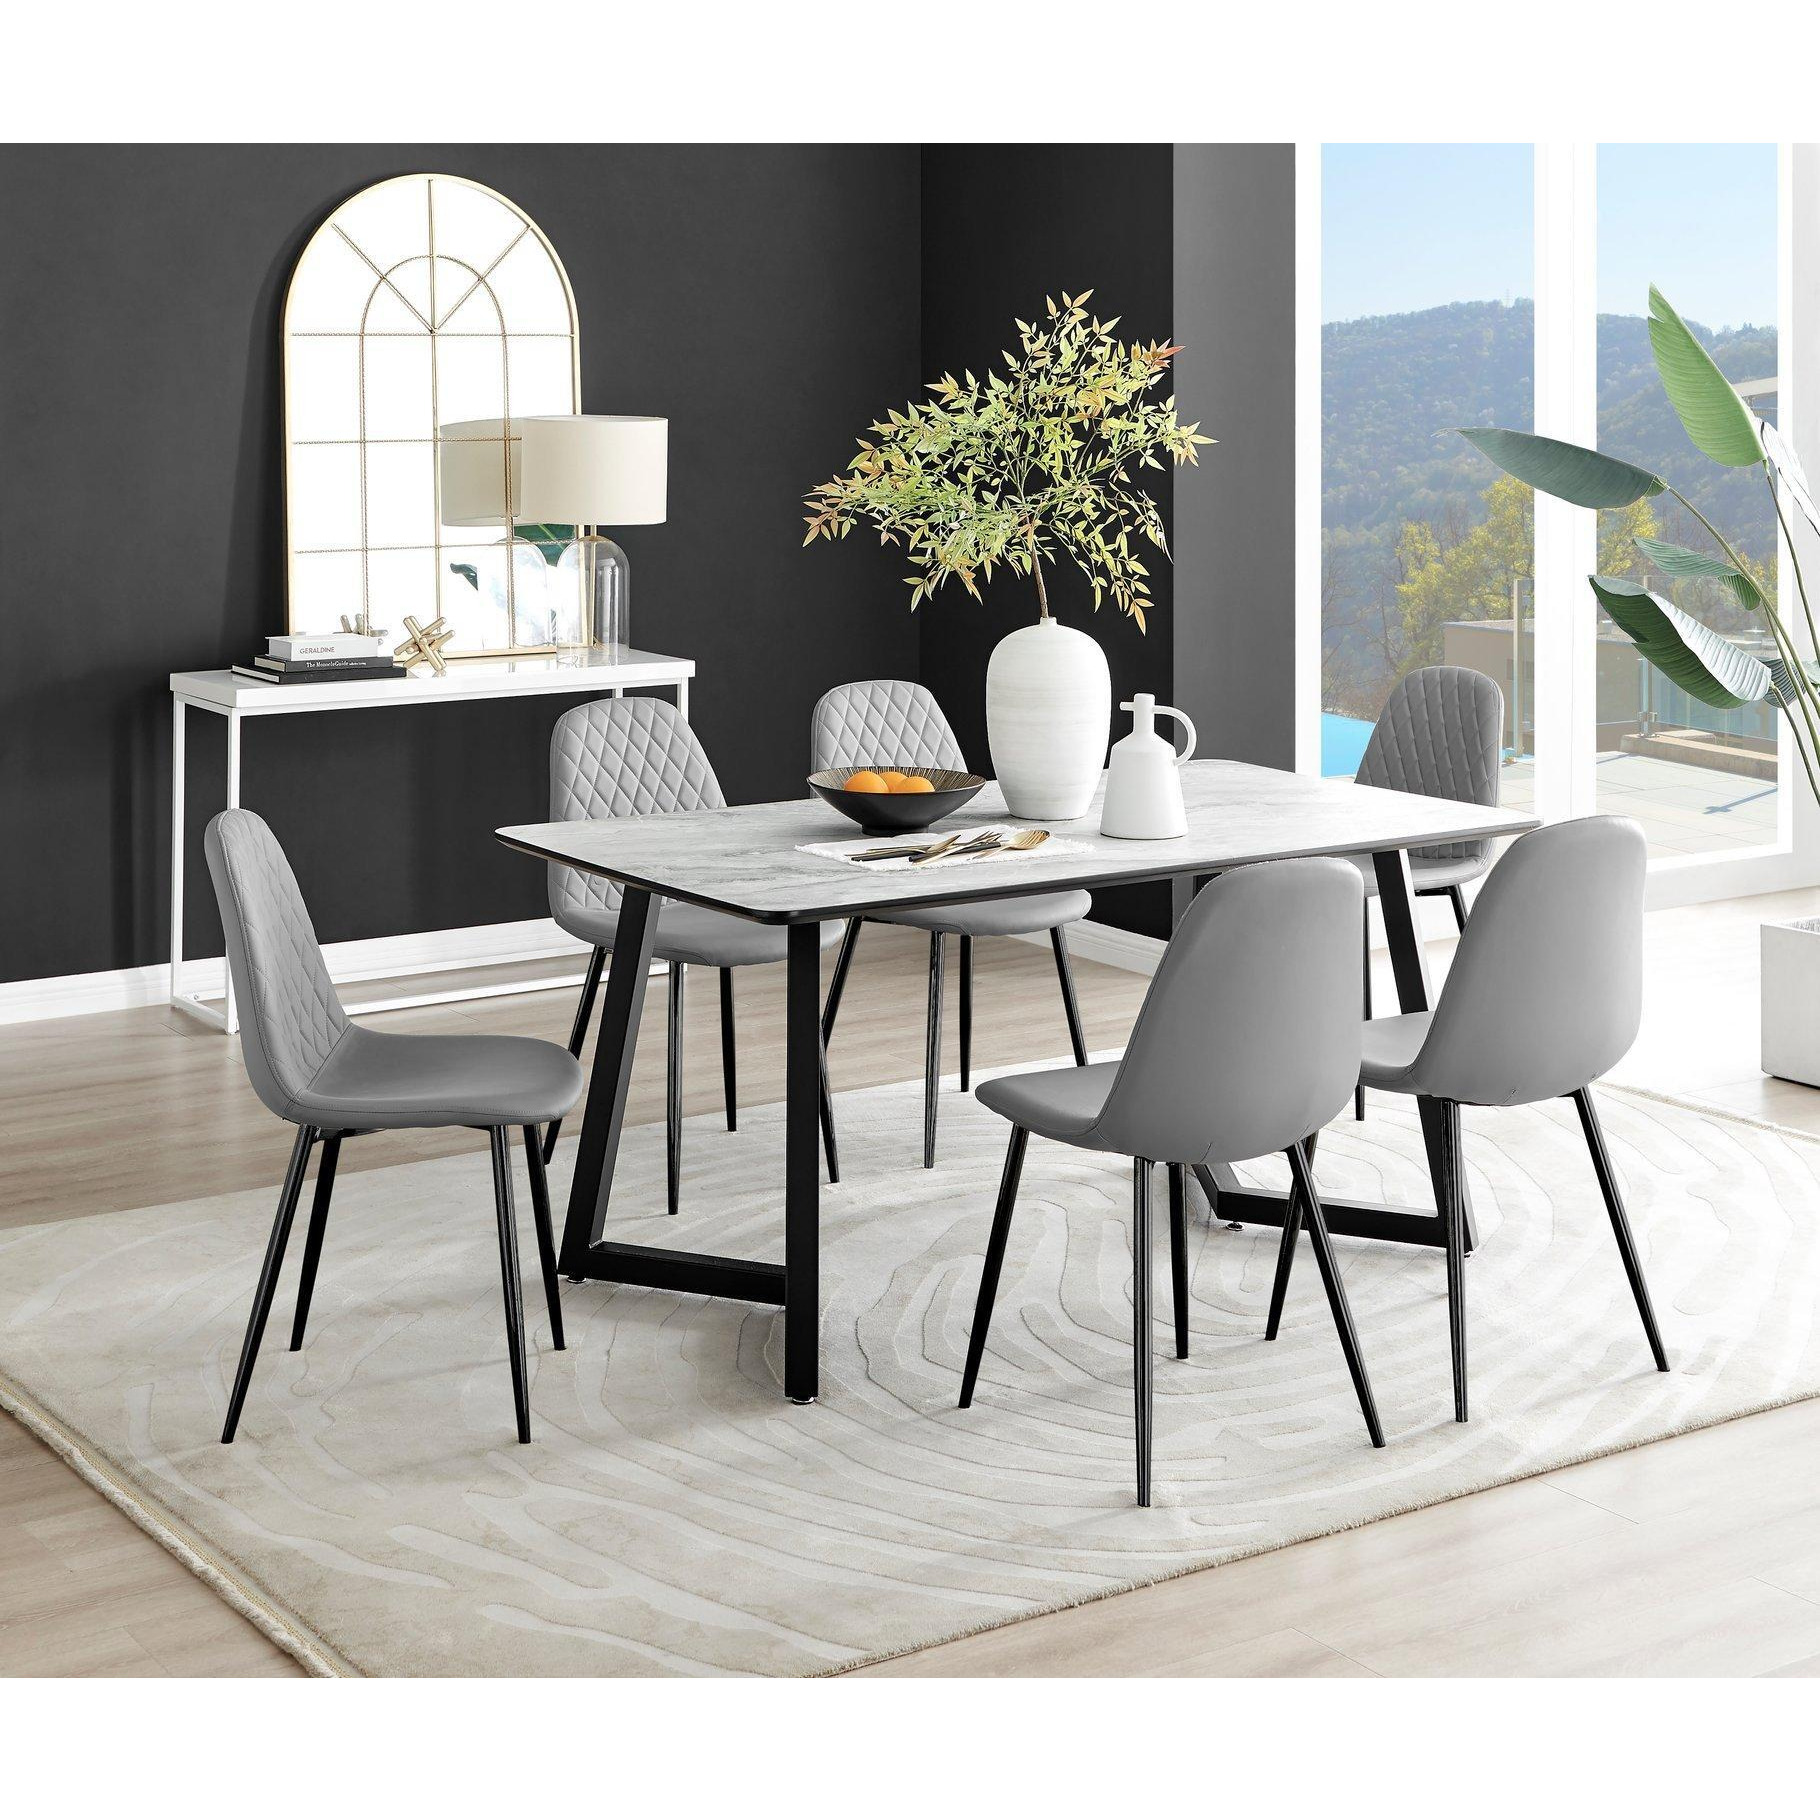 Carson White Marble Effect Dining Table & 6 Corona Black Leg Chairs - image 1